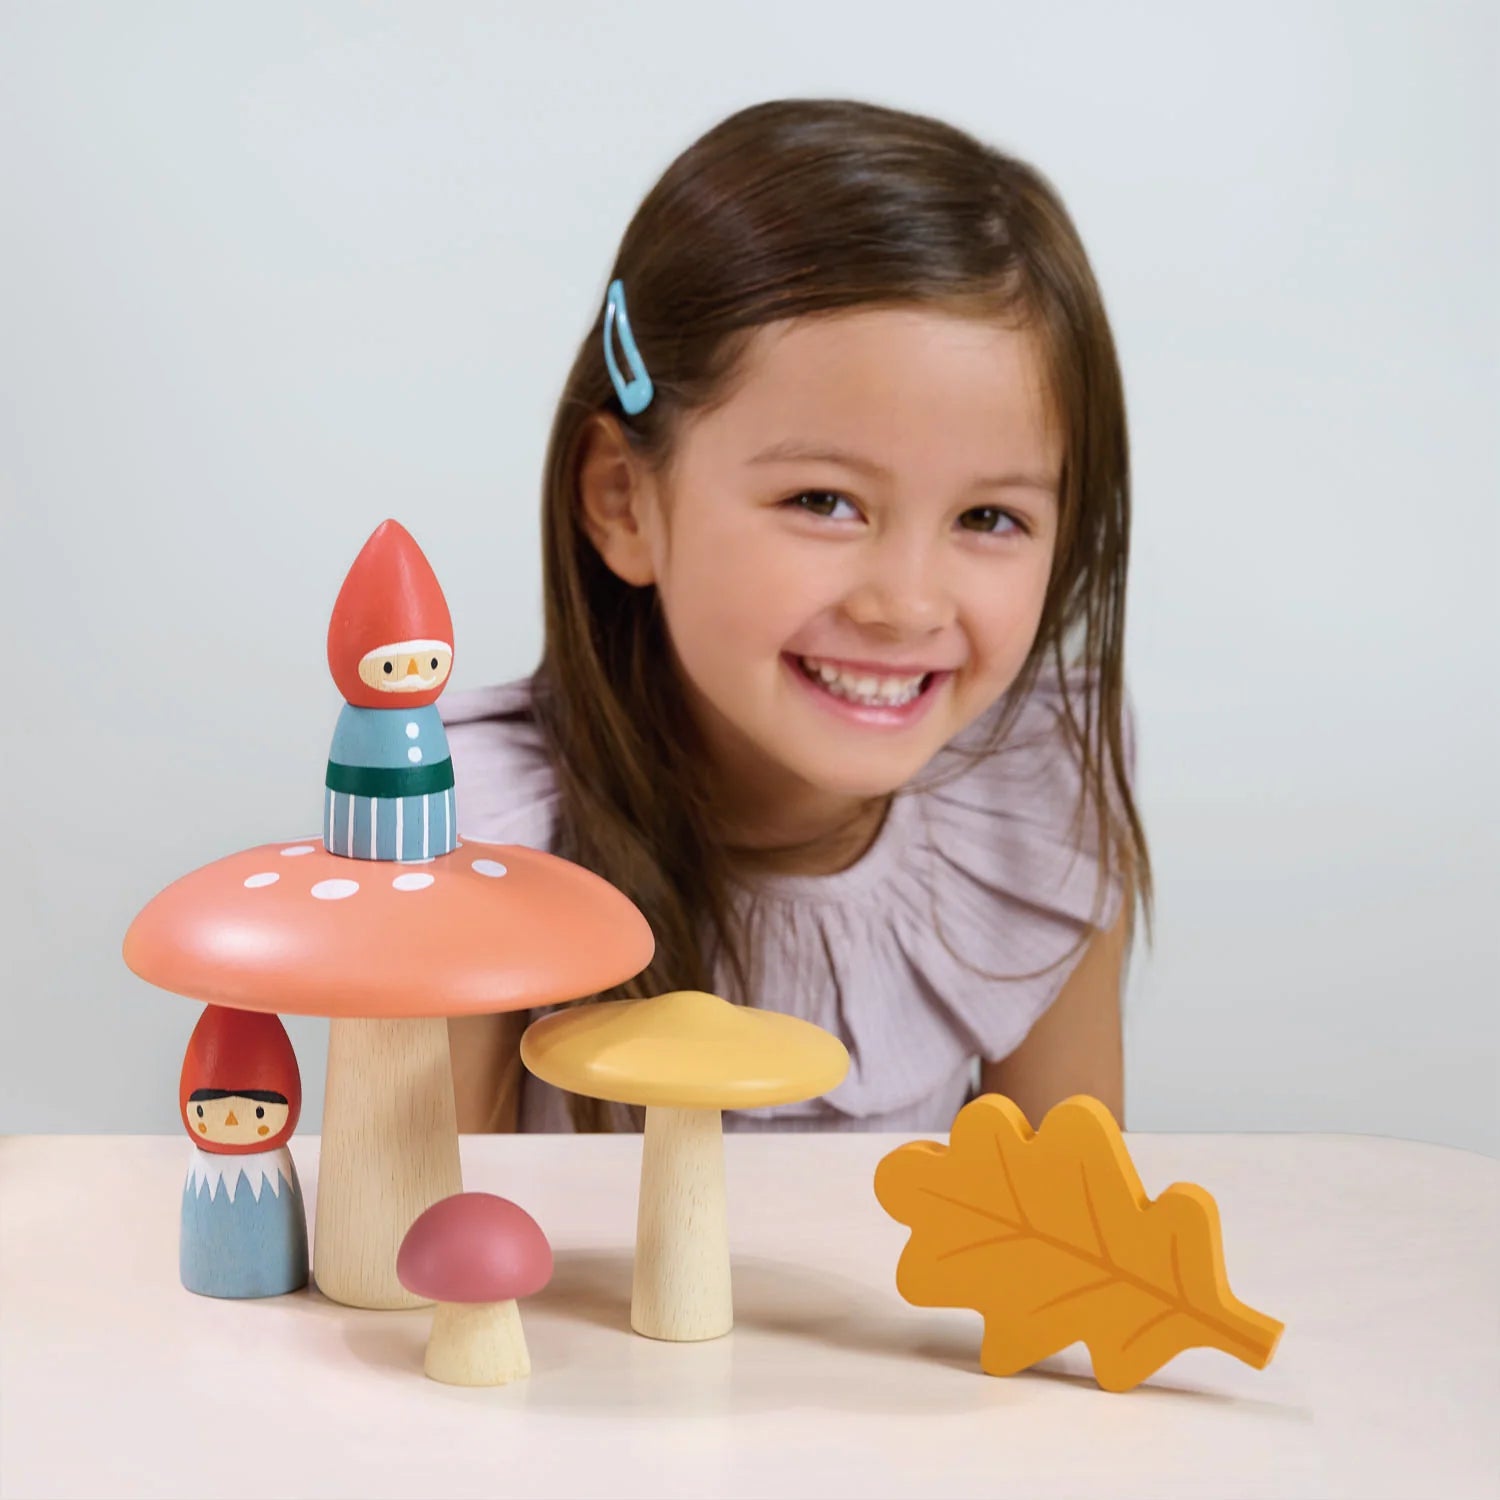 Girl poses with Tender Leaf Toys Woodland Gnome Family